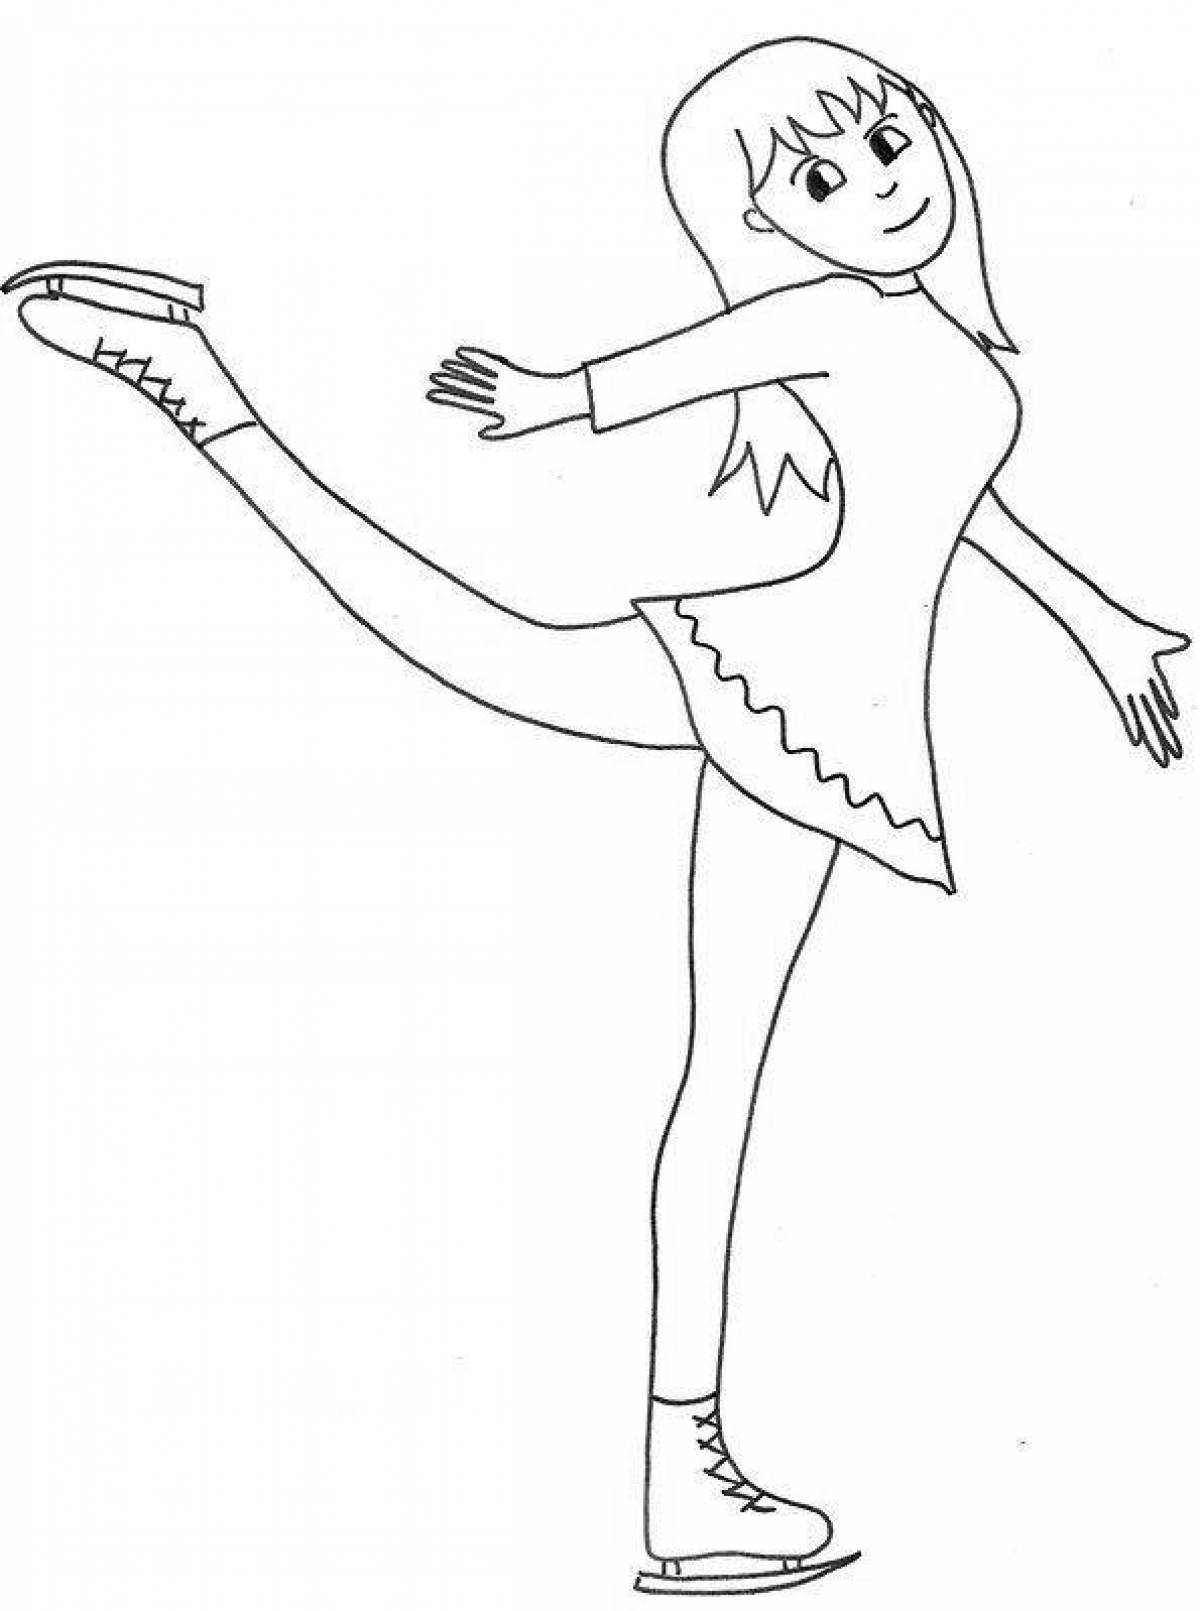 Exciting figure skater coloring book for kids